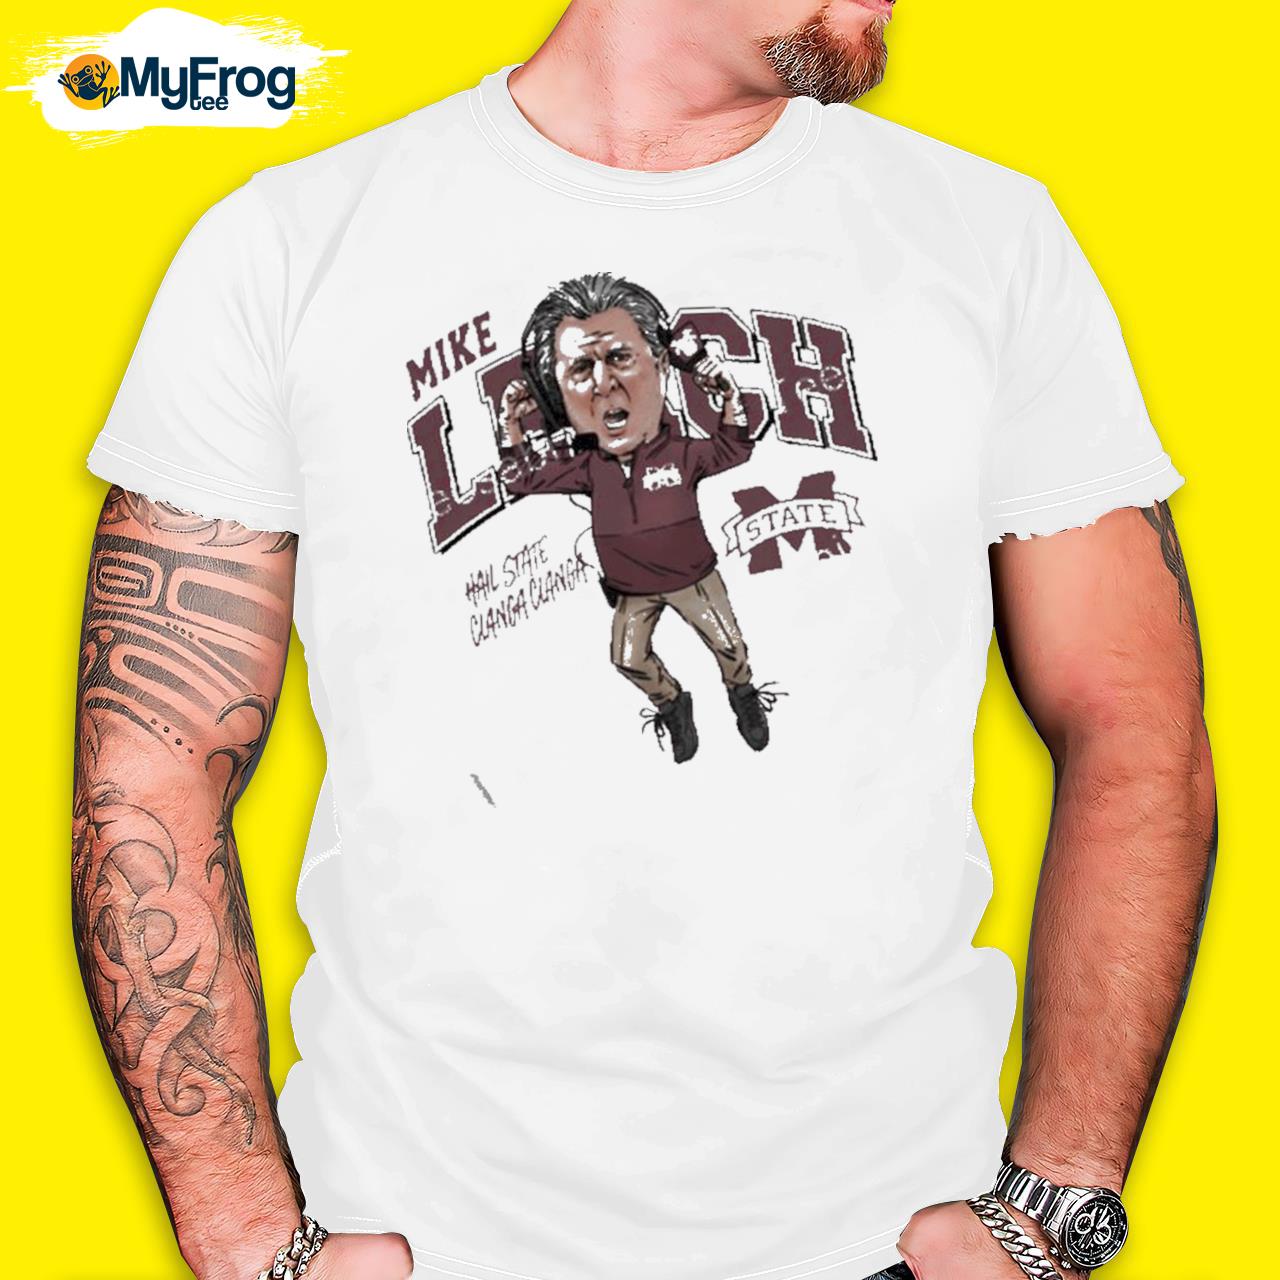 2022 Mike leach caricature mississippI state university collection shirt